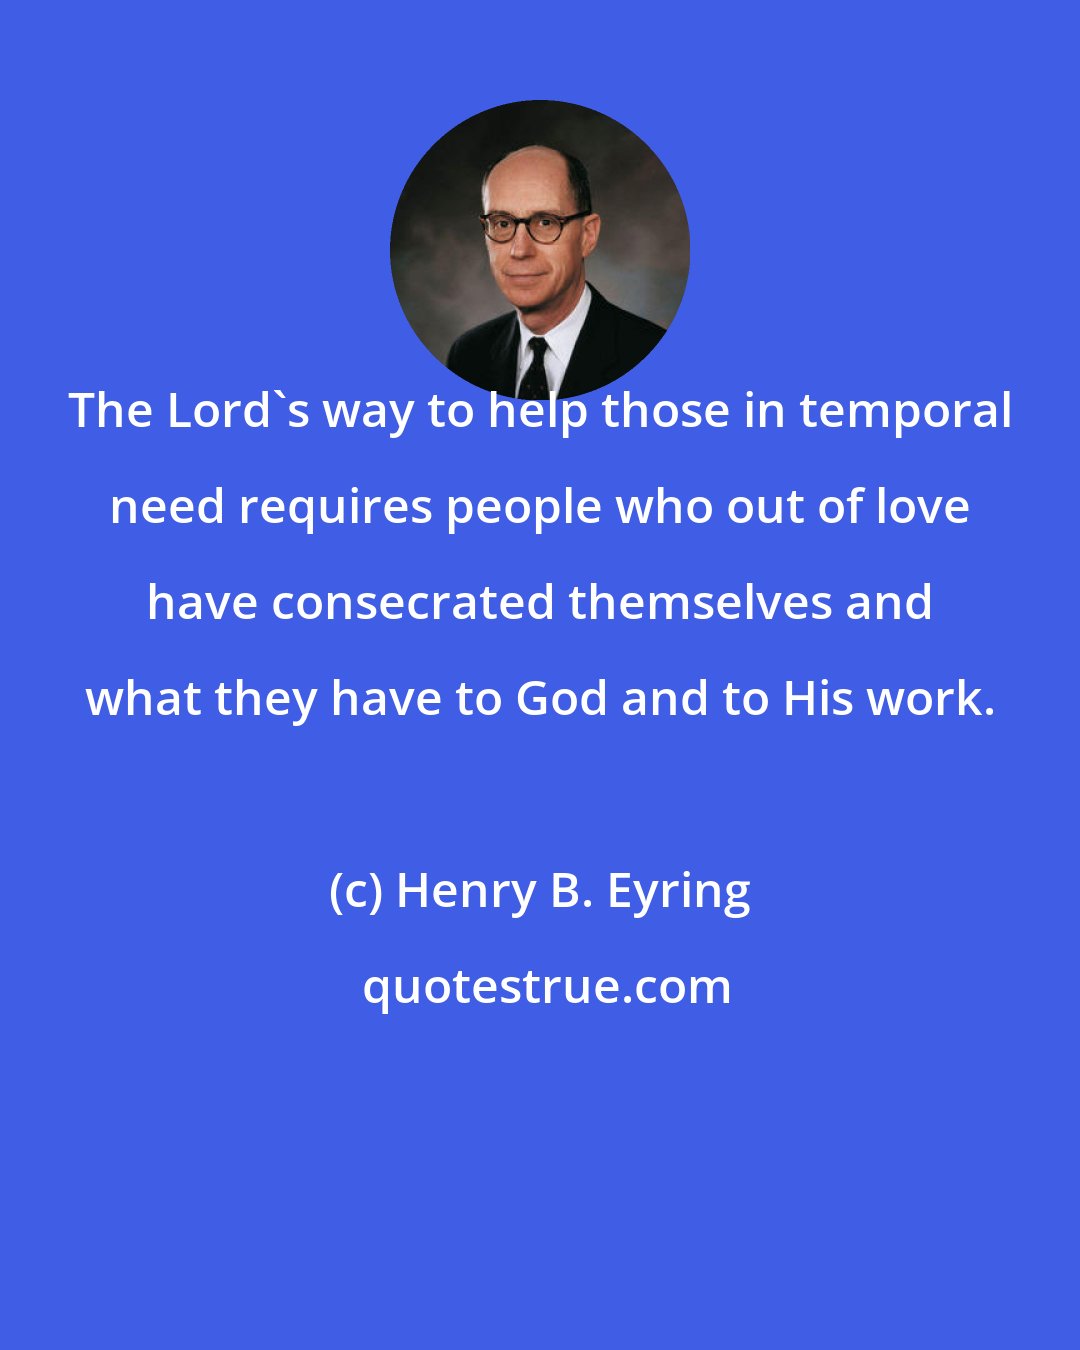 Henry B. Eyring: The Lord's way to help those in temporal need requires people who out of love have consecrated themselves and what they have to God and to His work.